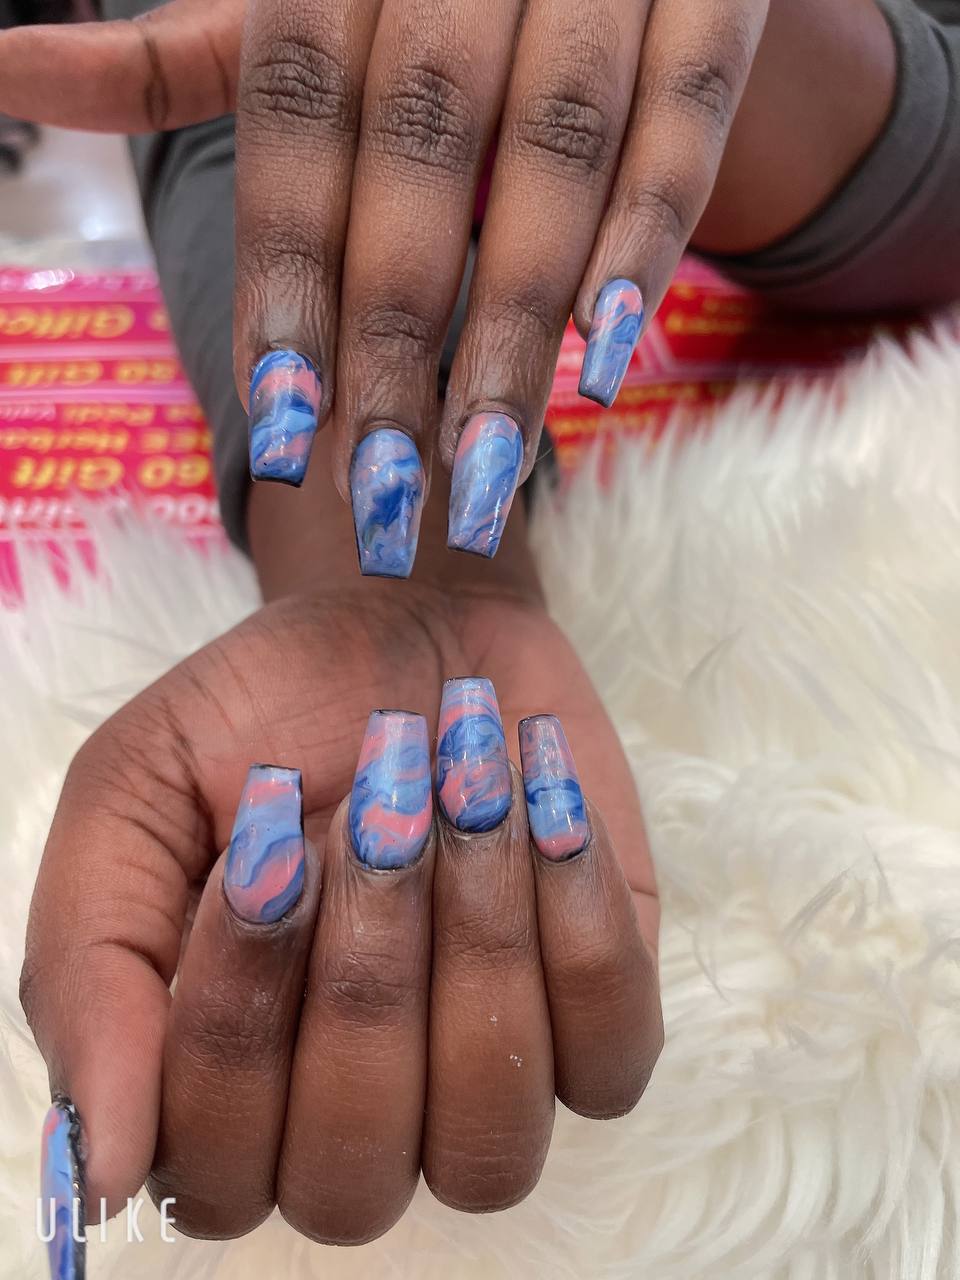 Blue Nail Art Designs: The Latest Trend in Creative Nail Decoration...